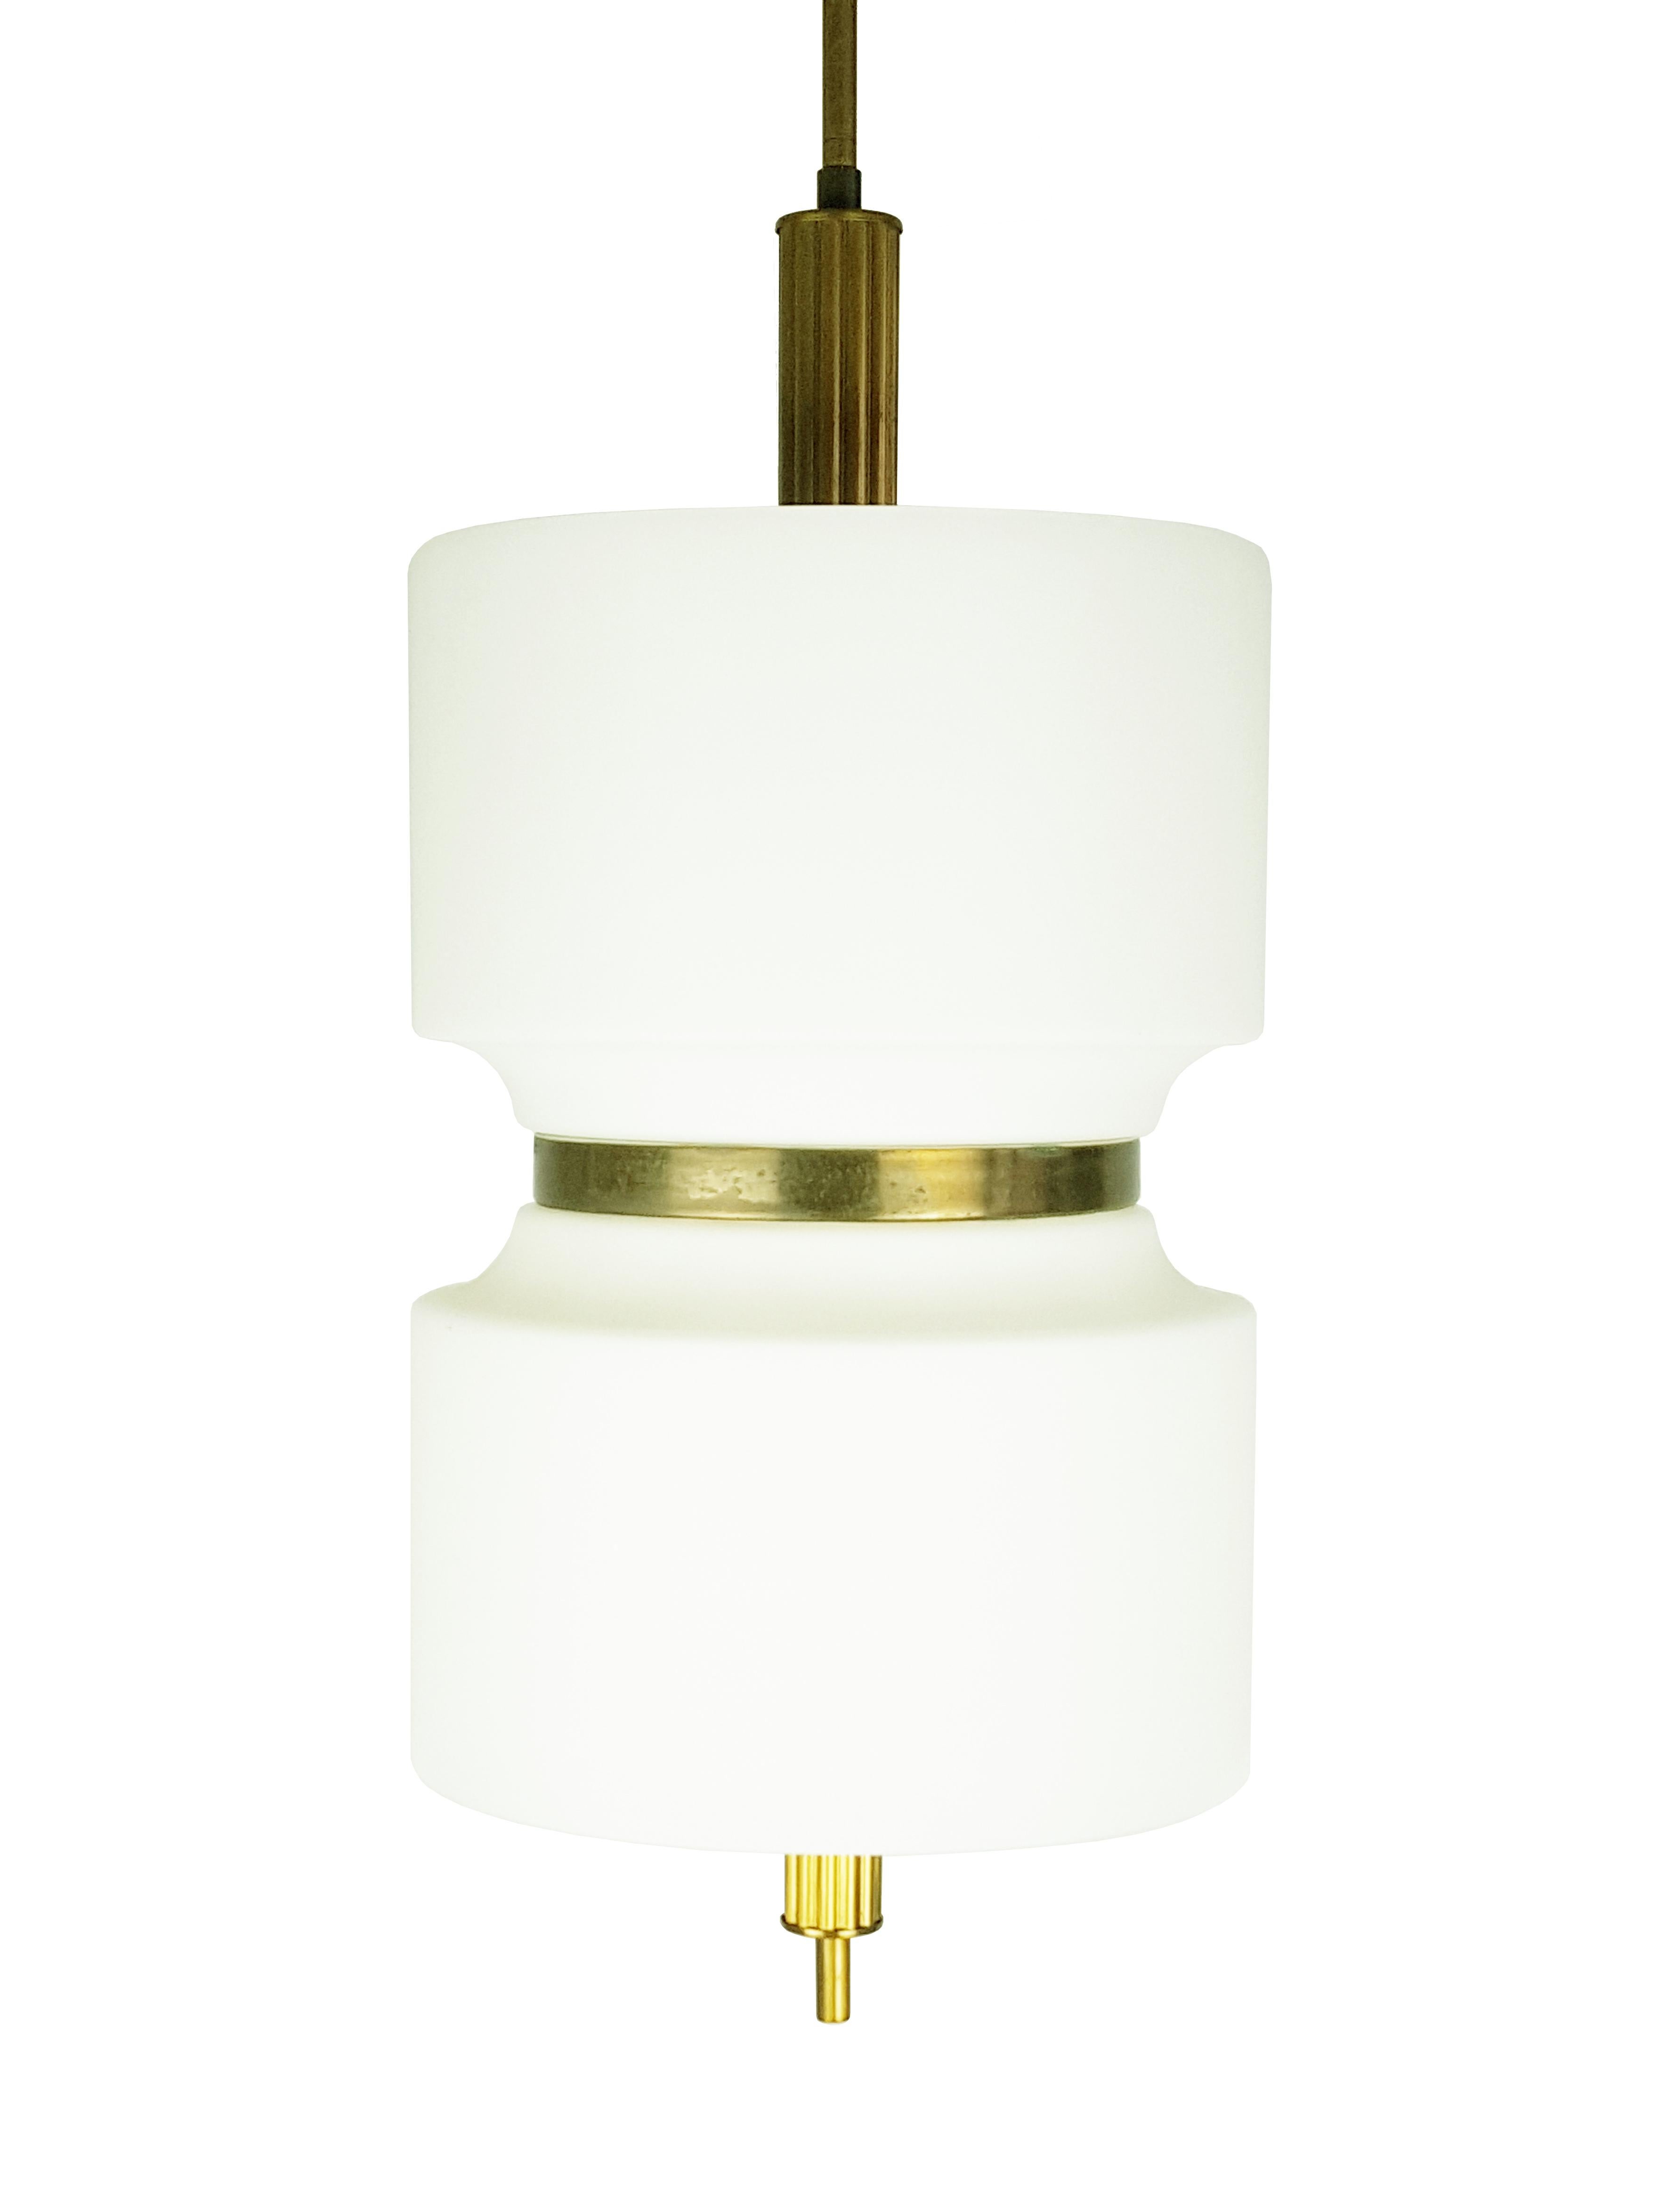 This high quality pendant light was designed by Oscar Torlasco and produced in Italy by Lumi. It is made from two sandblasted glass shades joined together by a brass belt. Each shade features three bulb-lights. Excellent vintage condition.